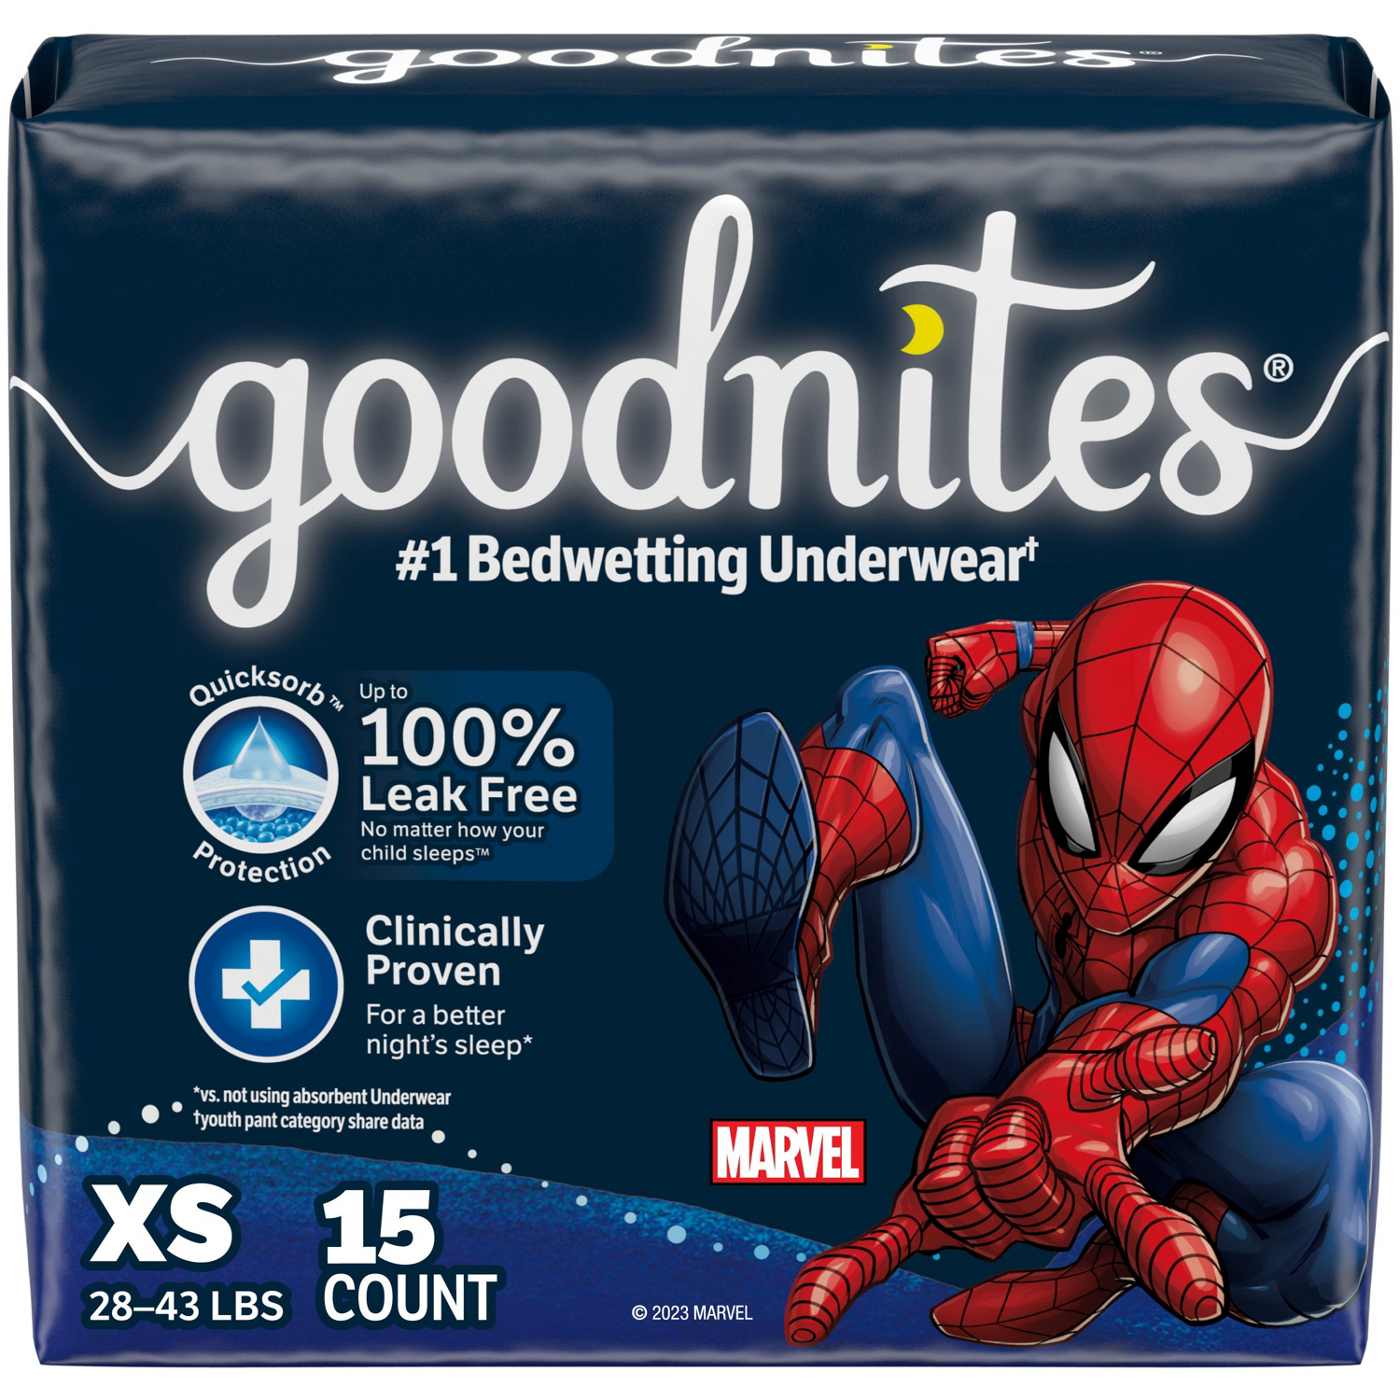 Goodnites Overnight Underwear for Boys - XS - Shop Training Pants at H-E-B